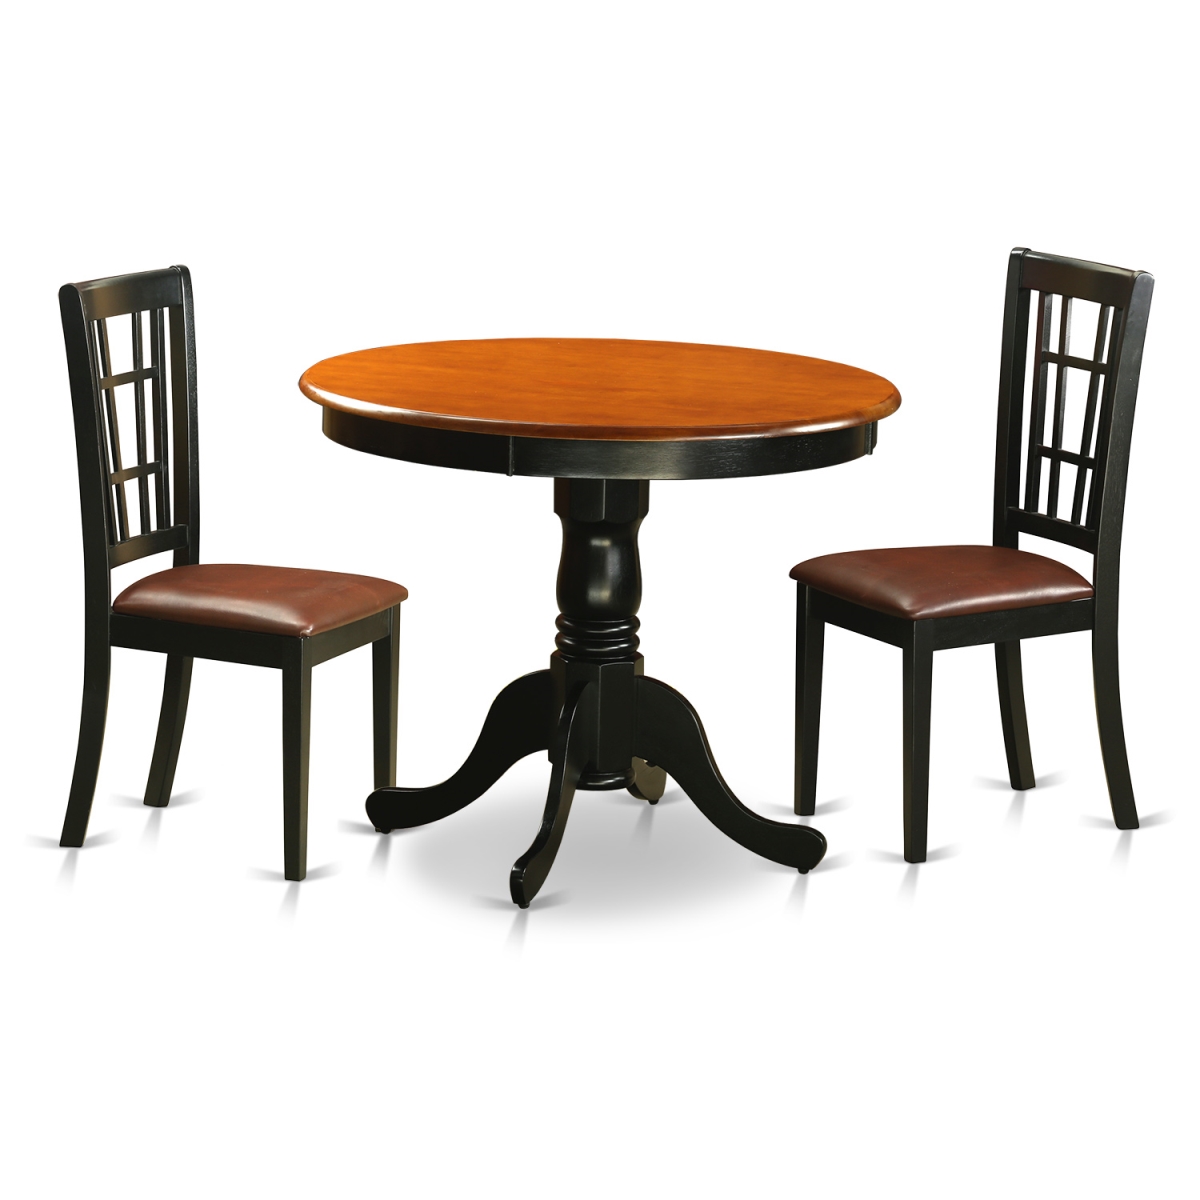 Picture of East West Furniture ANNI3-BLK-LC Dining Table with 2 Faux Leather Chairs, Black & Cherry - 3 Piece